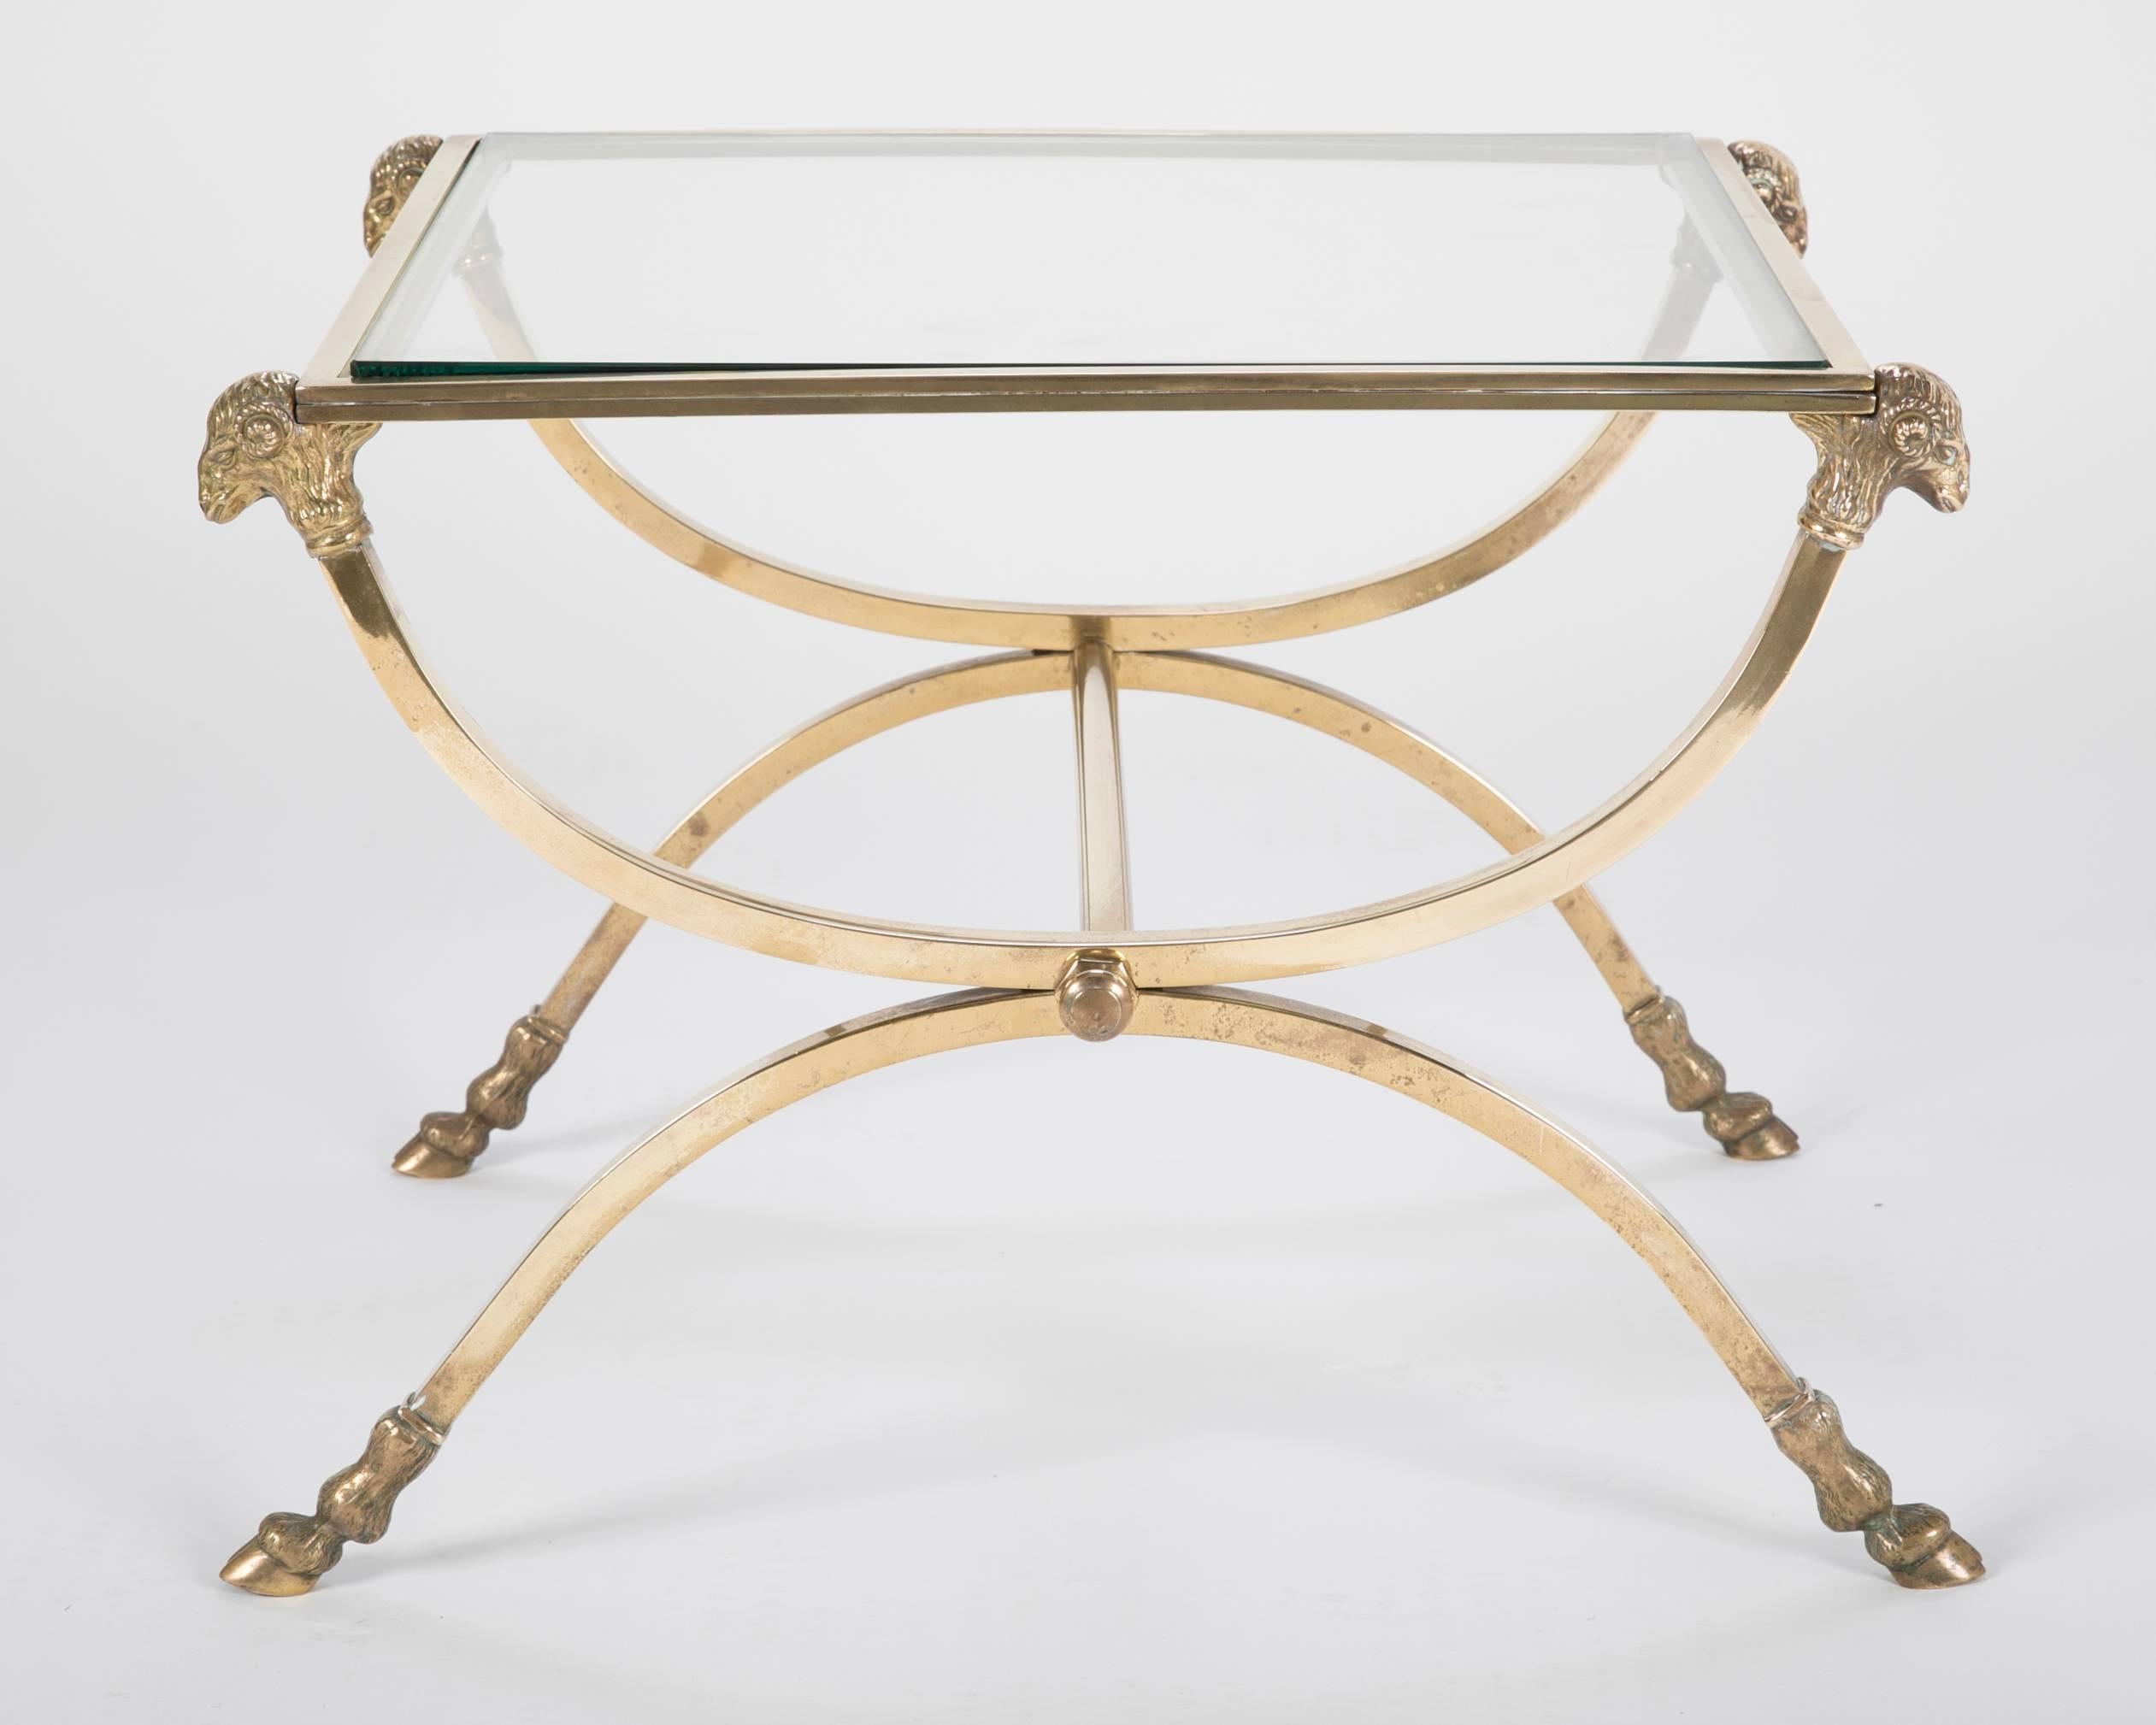 Italian Mid-Century Glass Topped Bronze Side Table with Rams Heads and Hoof Feet In Good Condition For Sale In Stamford, CT